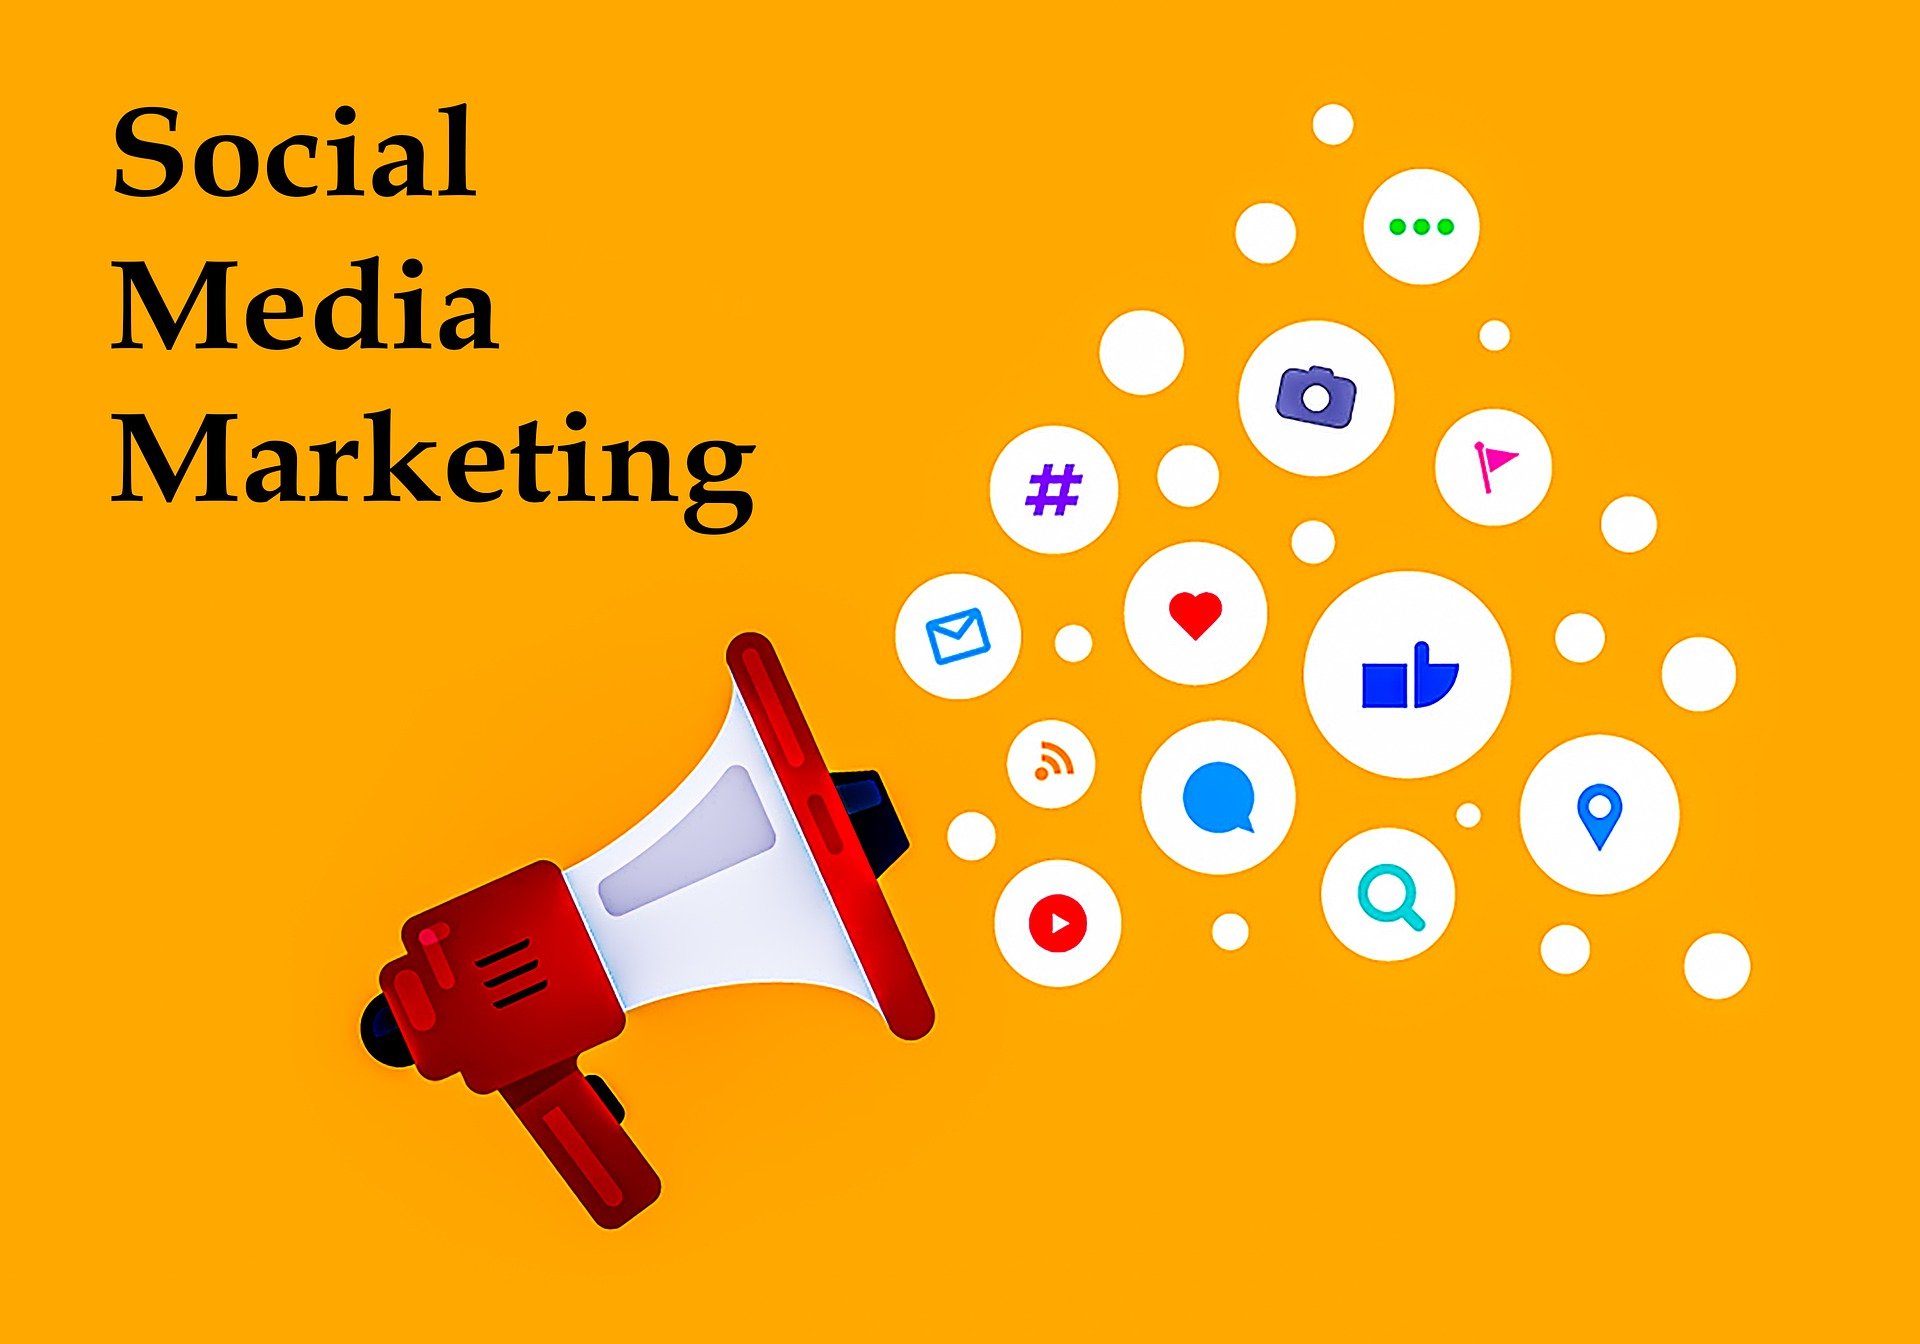 Are you looking for the right digital marketing tool? Choose the category based on your need